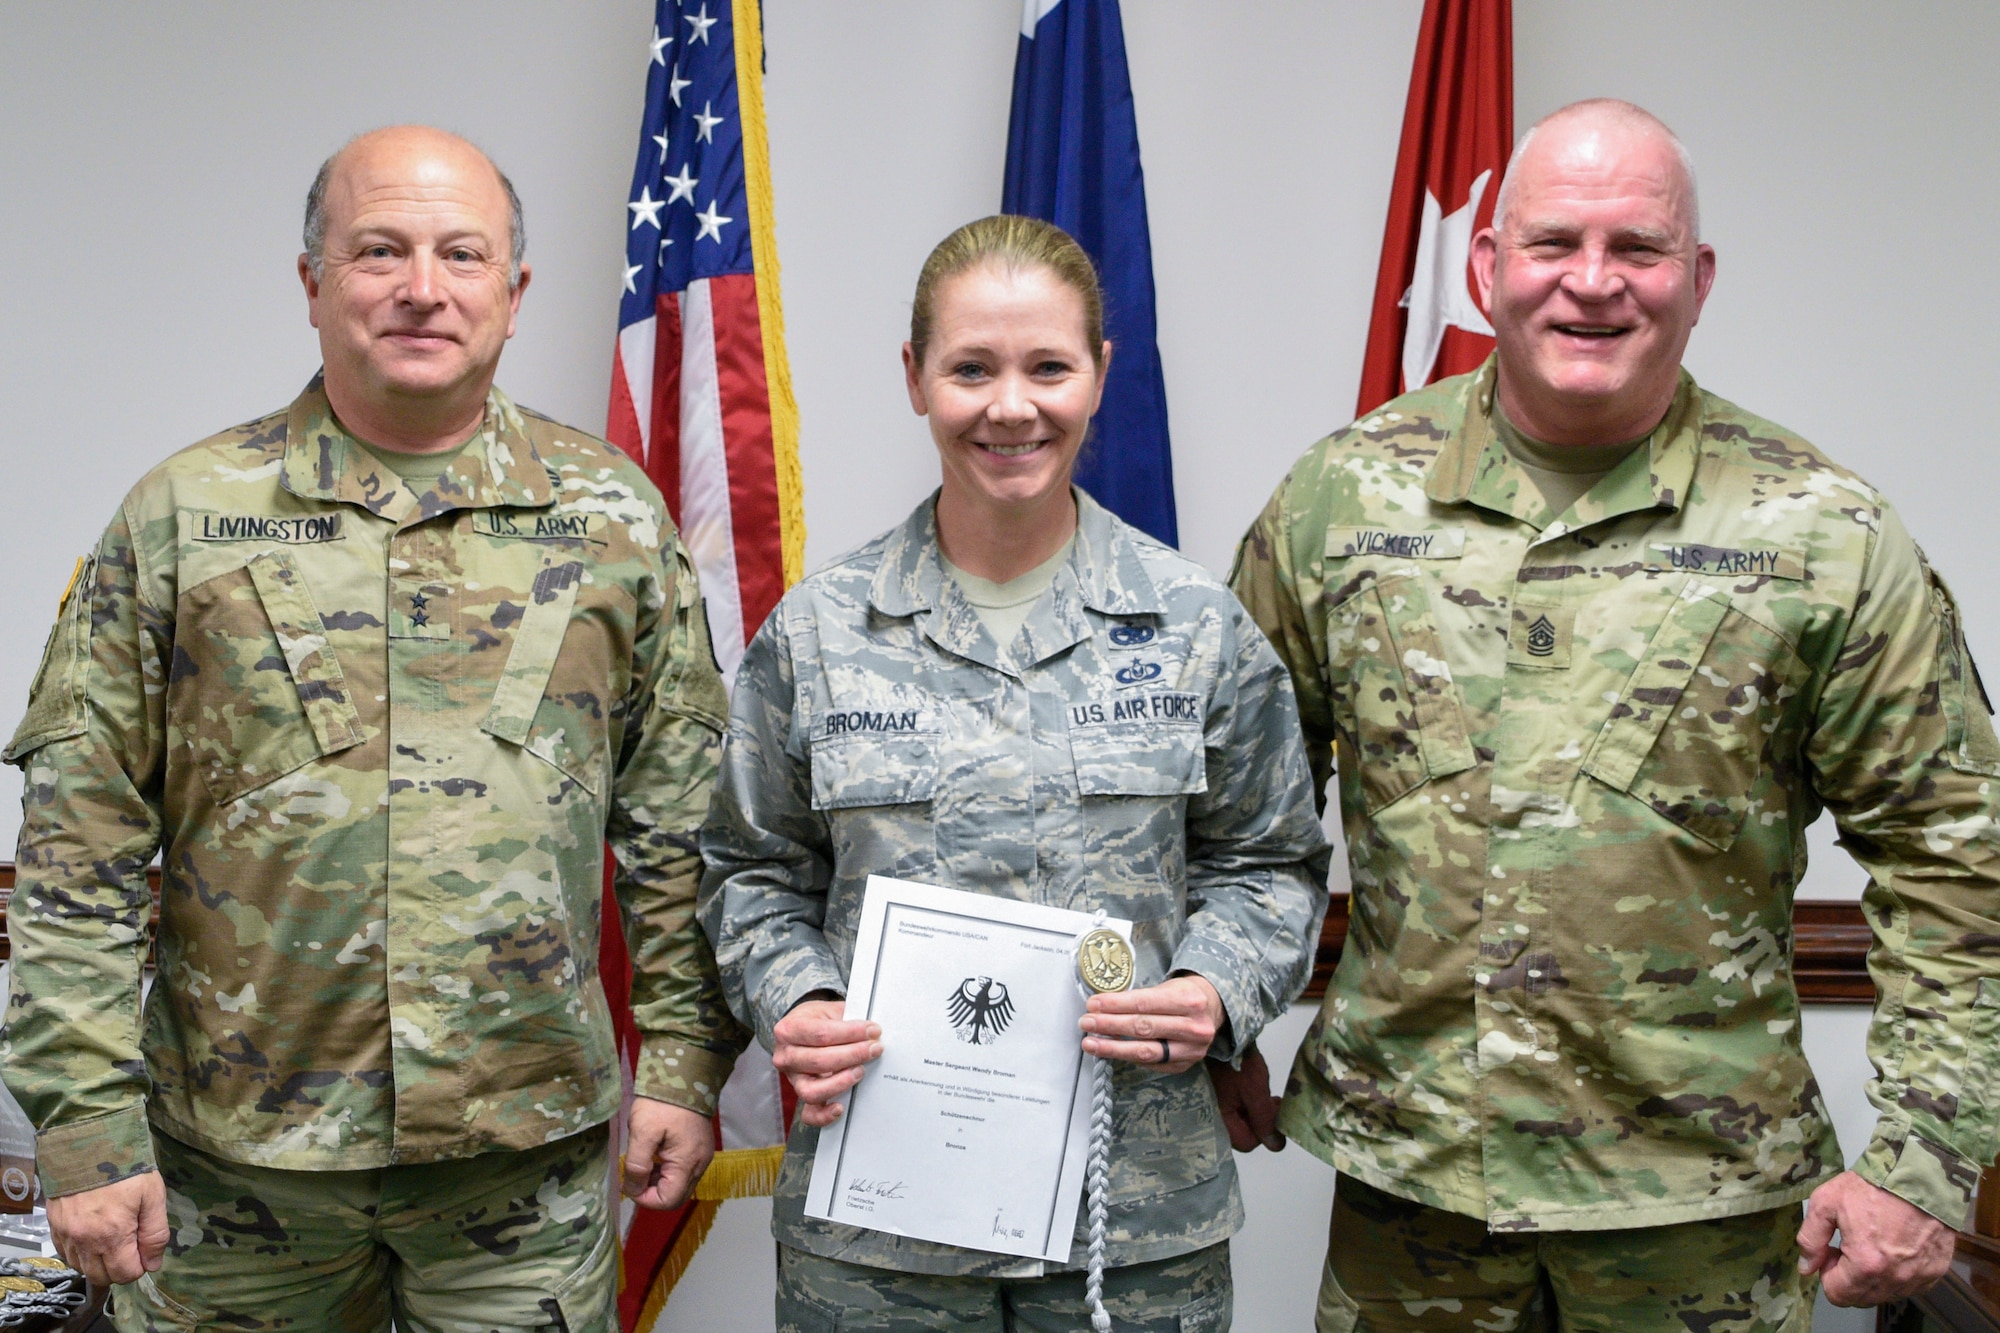 U.S.Army Maj. Gen. Robert E. Livingston Jr., adjutant general for South Carolina and State Command Sgt. Maj. Russel A. Vickery present the Schutzenschnur Badge to Master Sgt. Wendy Broman, a financial management specialist assigned to the South Carolina Air National Guard's 169th Fighter Wing, for demonstrating profeciency in firing German weapons at a ceremony March 7, 2018 at the Adjutant Generals' building in Columbia S.C. Broman and several other service members were chosen to participate in a specialized training opportunity to work with German soldiers. They learned how to fire a German rifle, pistol and machine gun. (U.S. Army National Guard photo by 1st Lt. Tracci Dorgan)